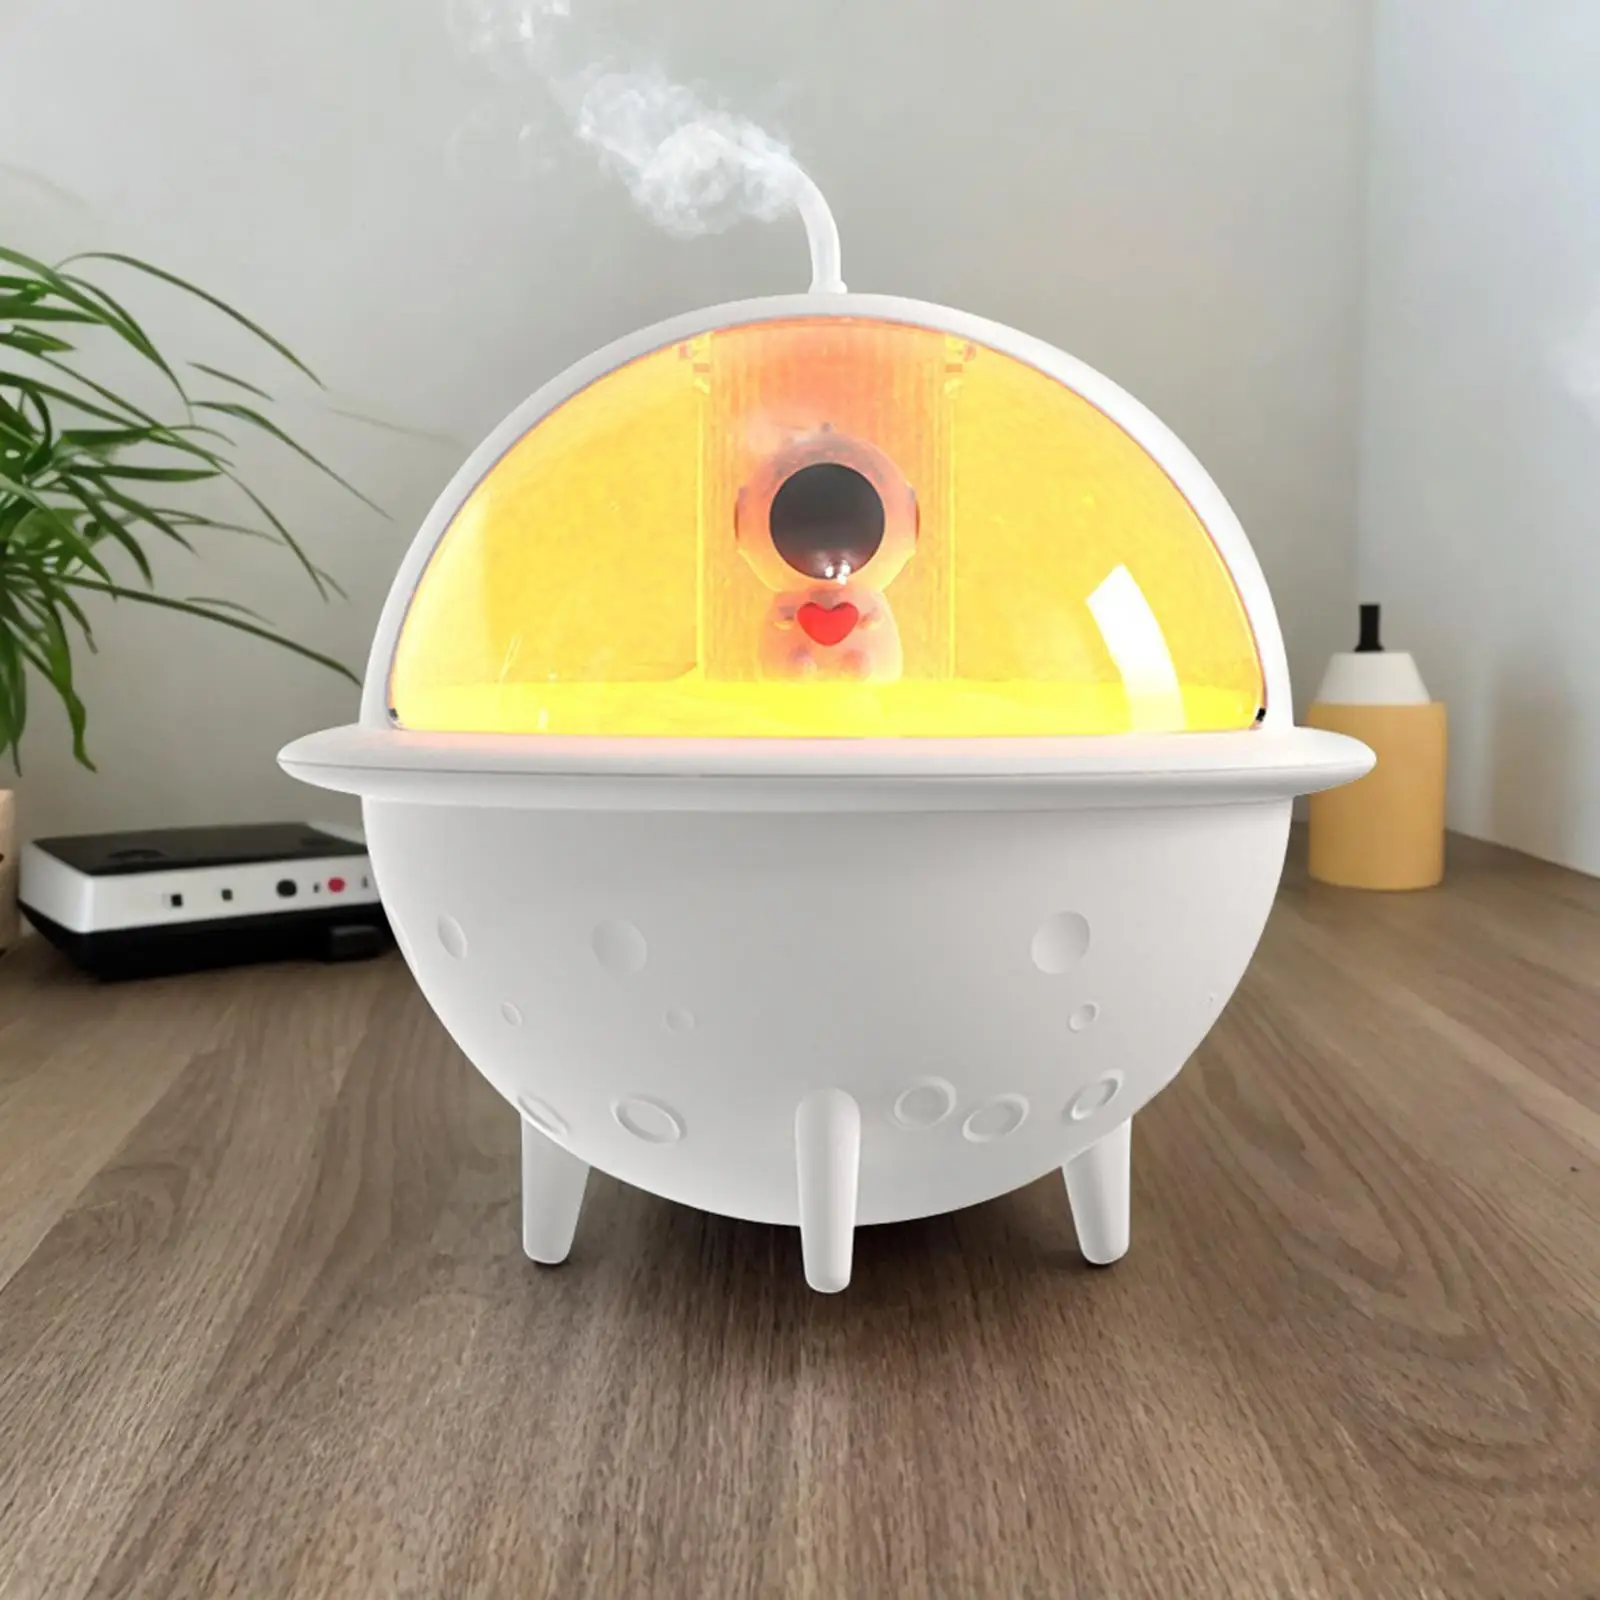 Astronaut Humidifier Rechargable Air Humidifier for Bedroom Home Living Room